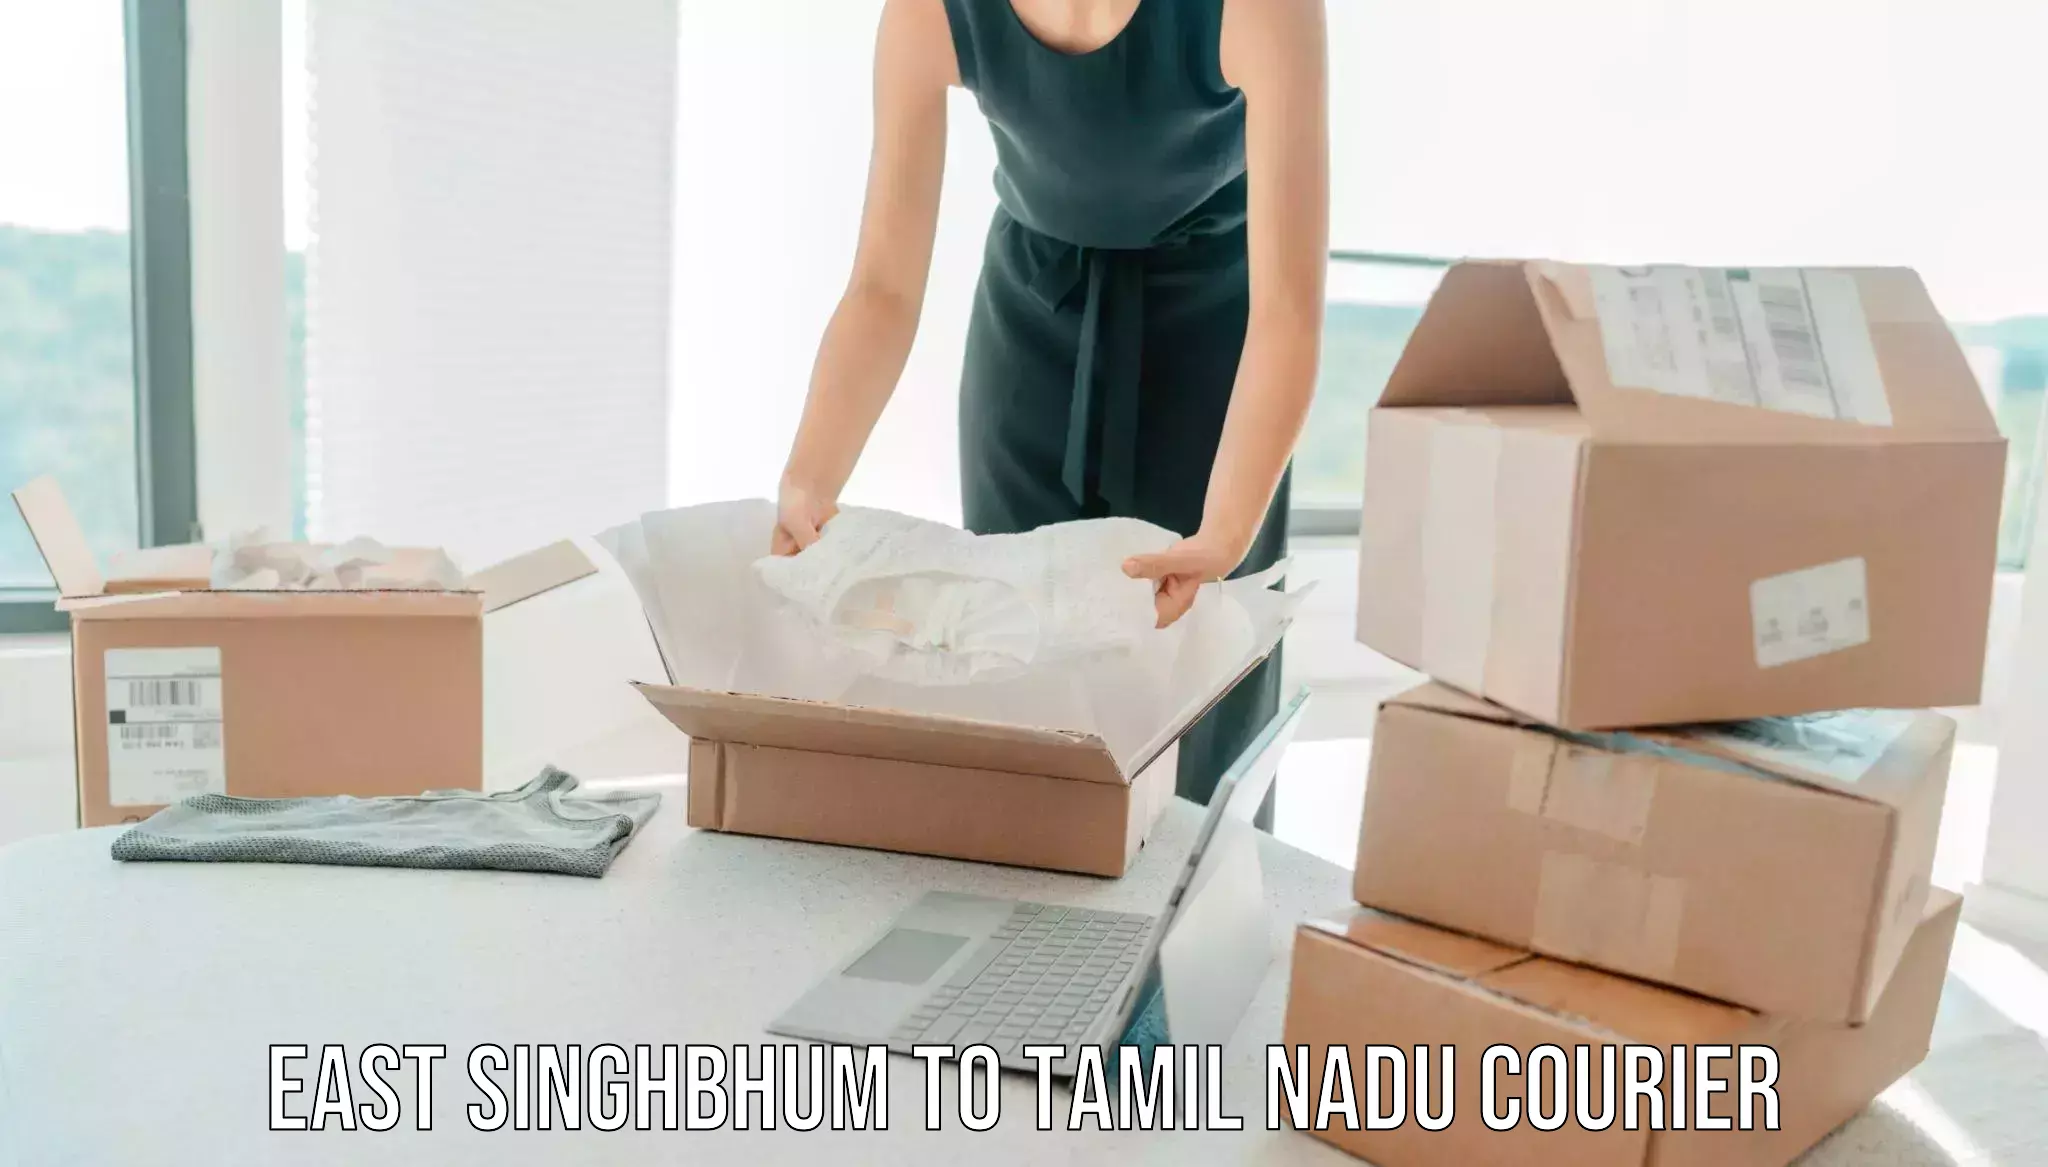 Home relocation experts East Singhbhum to Ambasamudram